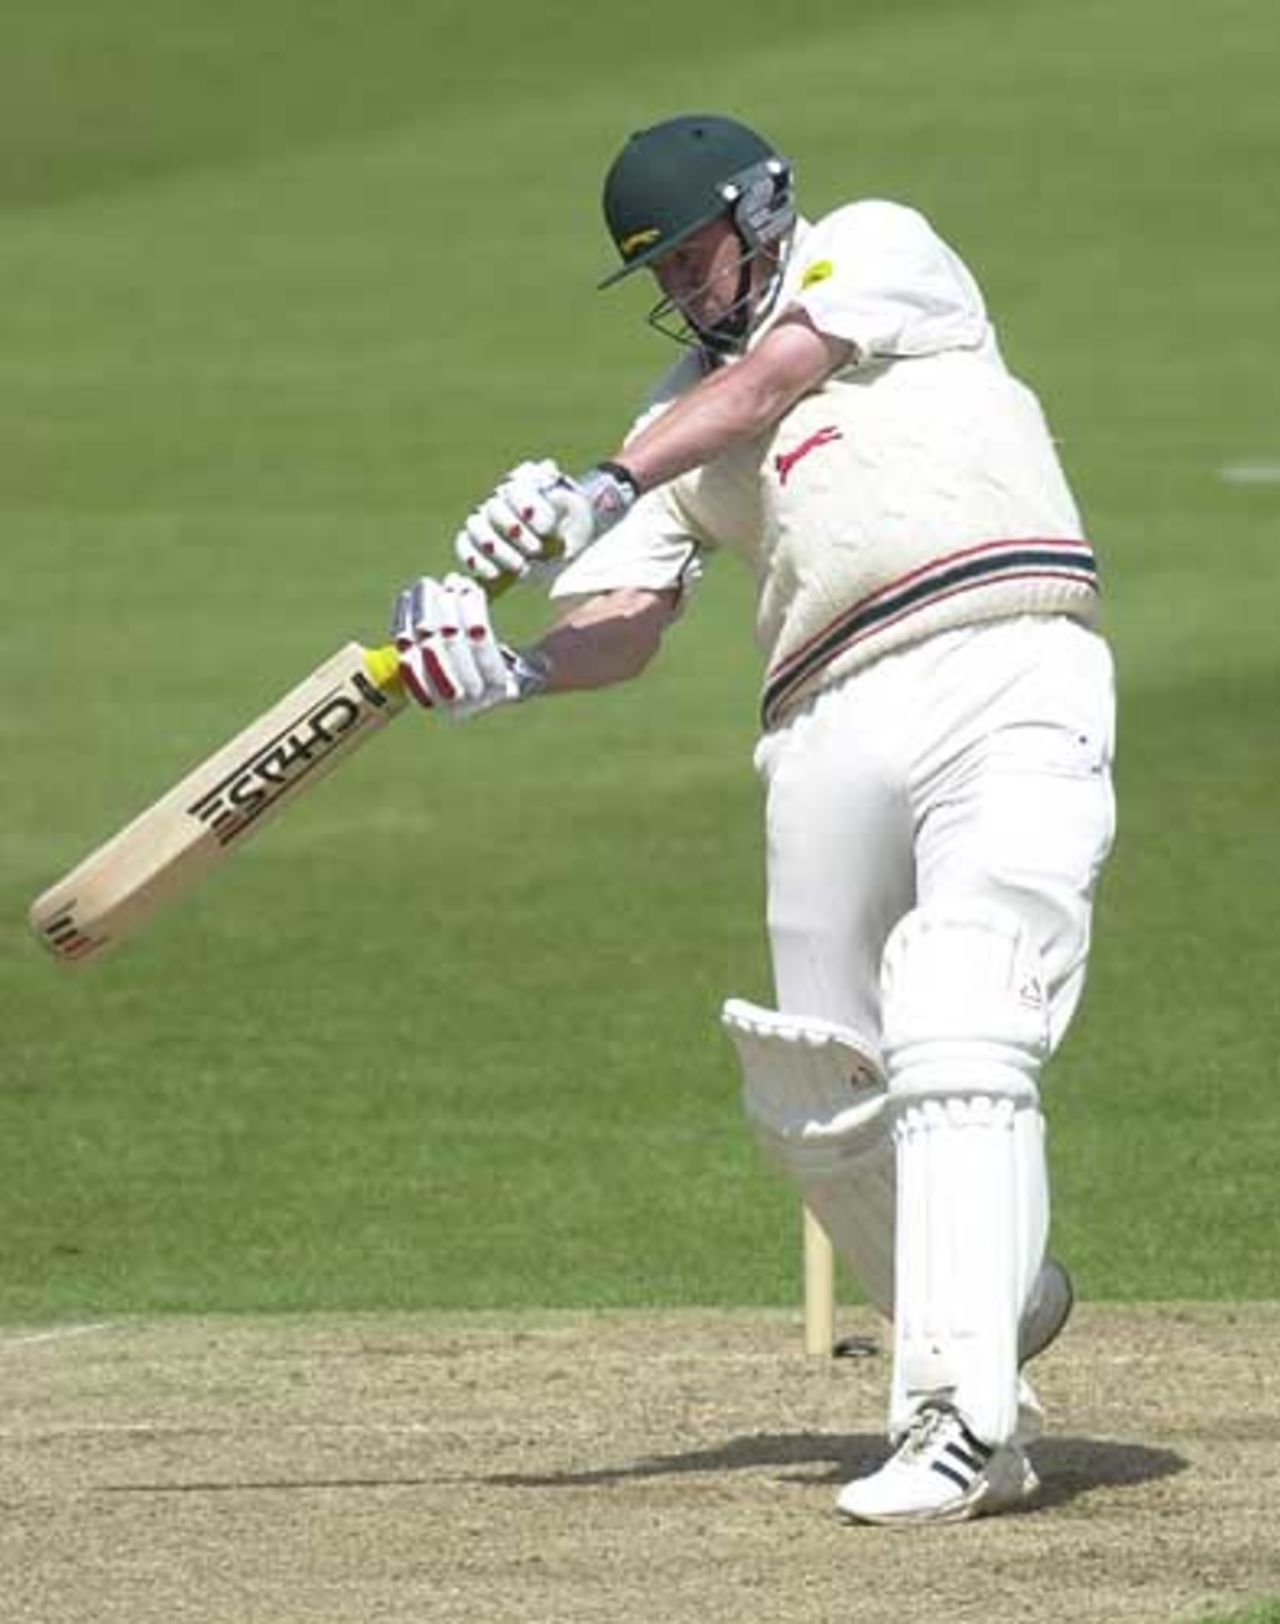 Leics Carl Crowe smacks a John Wood delivery for 4 runs, Benson & Hedges Cup, May 22 at Leicester